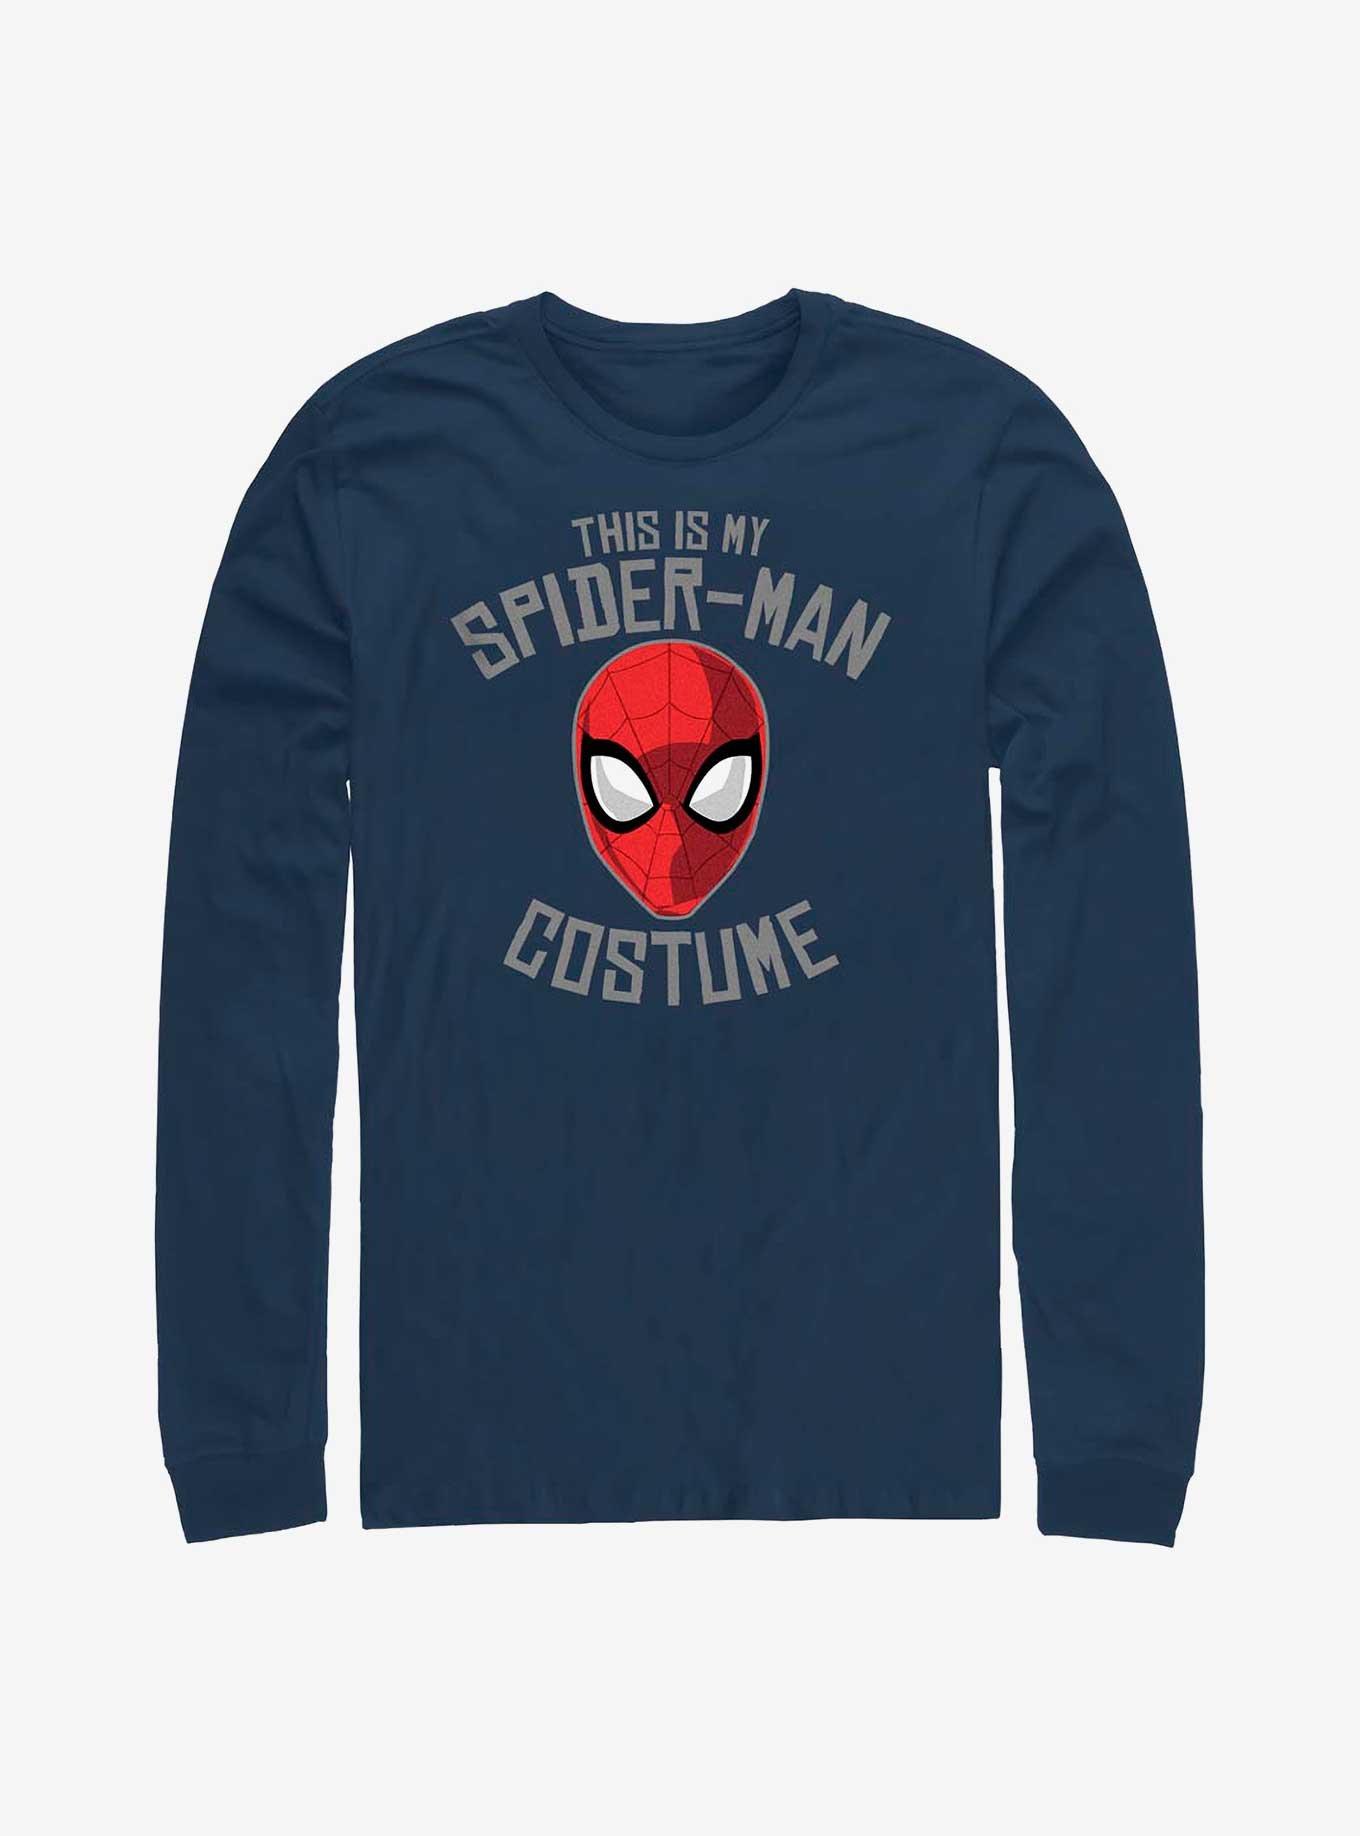 Marvel Spider-Man This Is My Costume Long-Sleeve T-Shirt, NAVY, hi-res